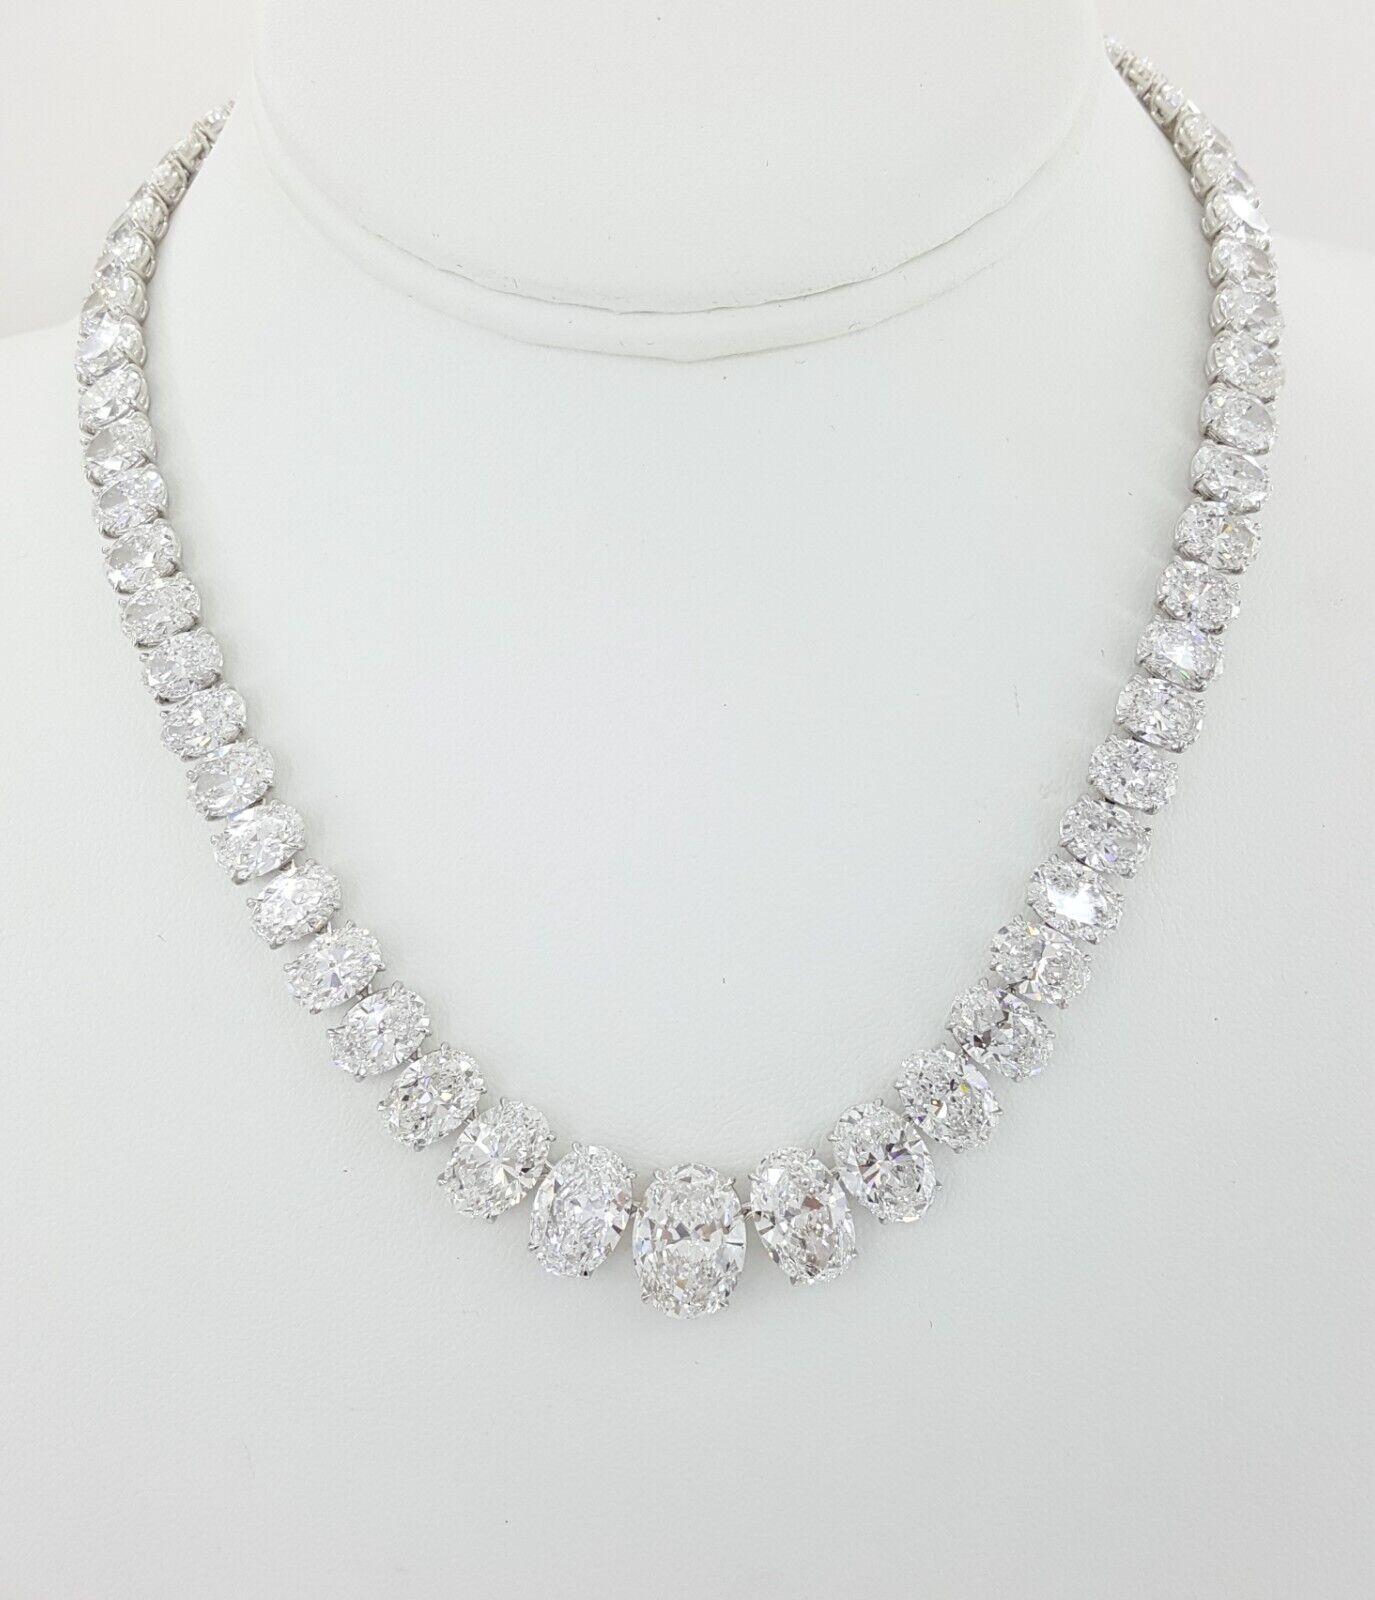 Introducing the Riviera Diamond Necklace – a masterpiece of unparalleled artistry and elegance. Handcrafted in luxurious platinum, this necklace boasts a dazzling array of 65 GIA Certified oval-cut diamonds, totaling an impressive 85 carats. Each